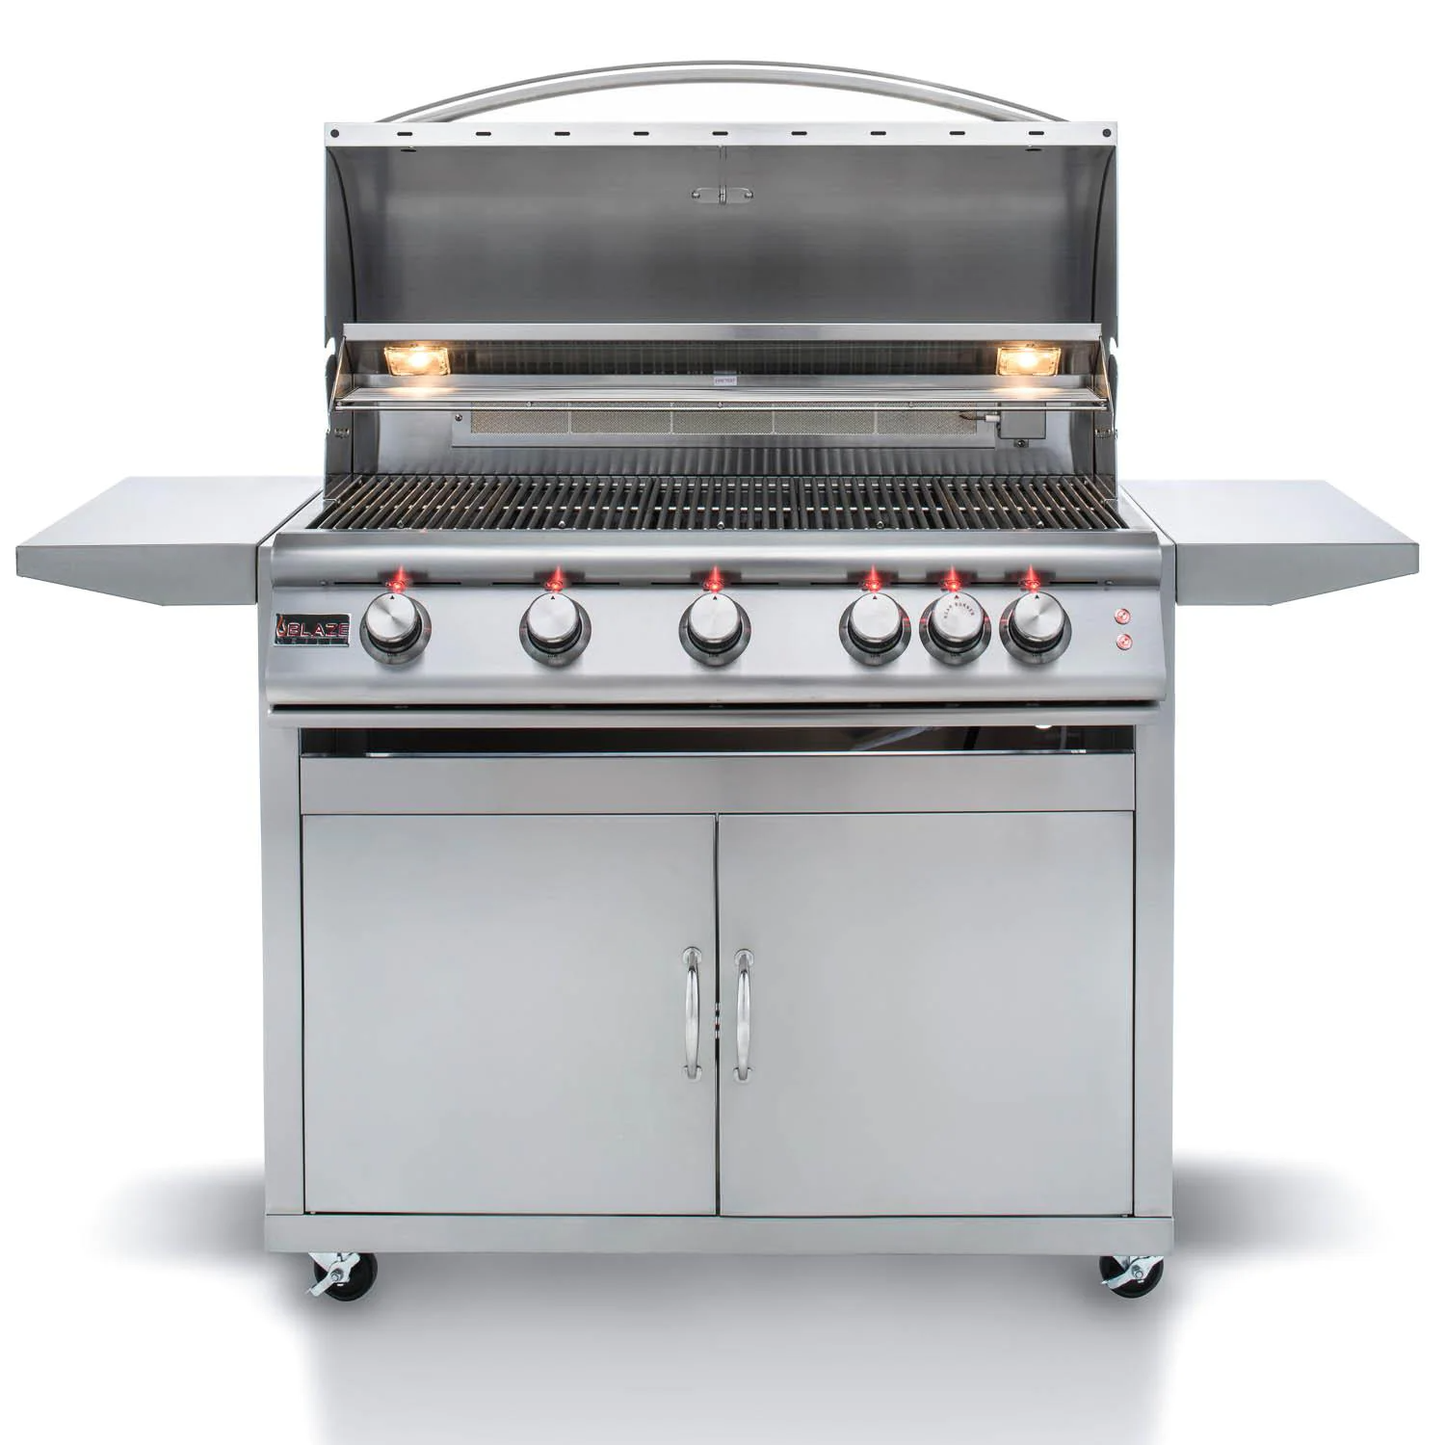 Blaze Premium LTE 40" 5-Burner Gas Grill With Rear Infrared Burners